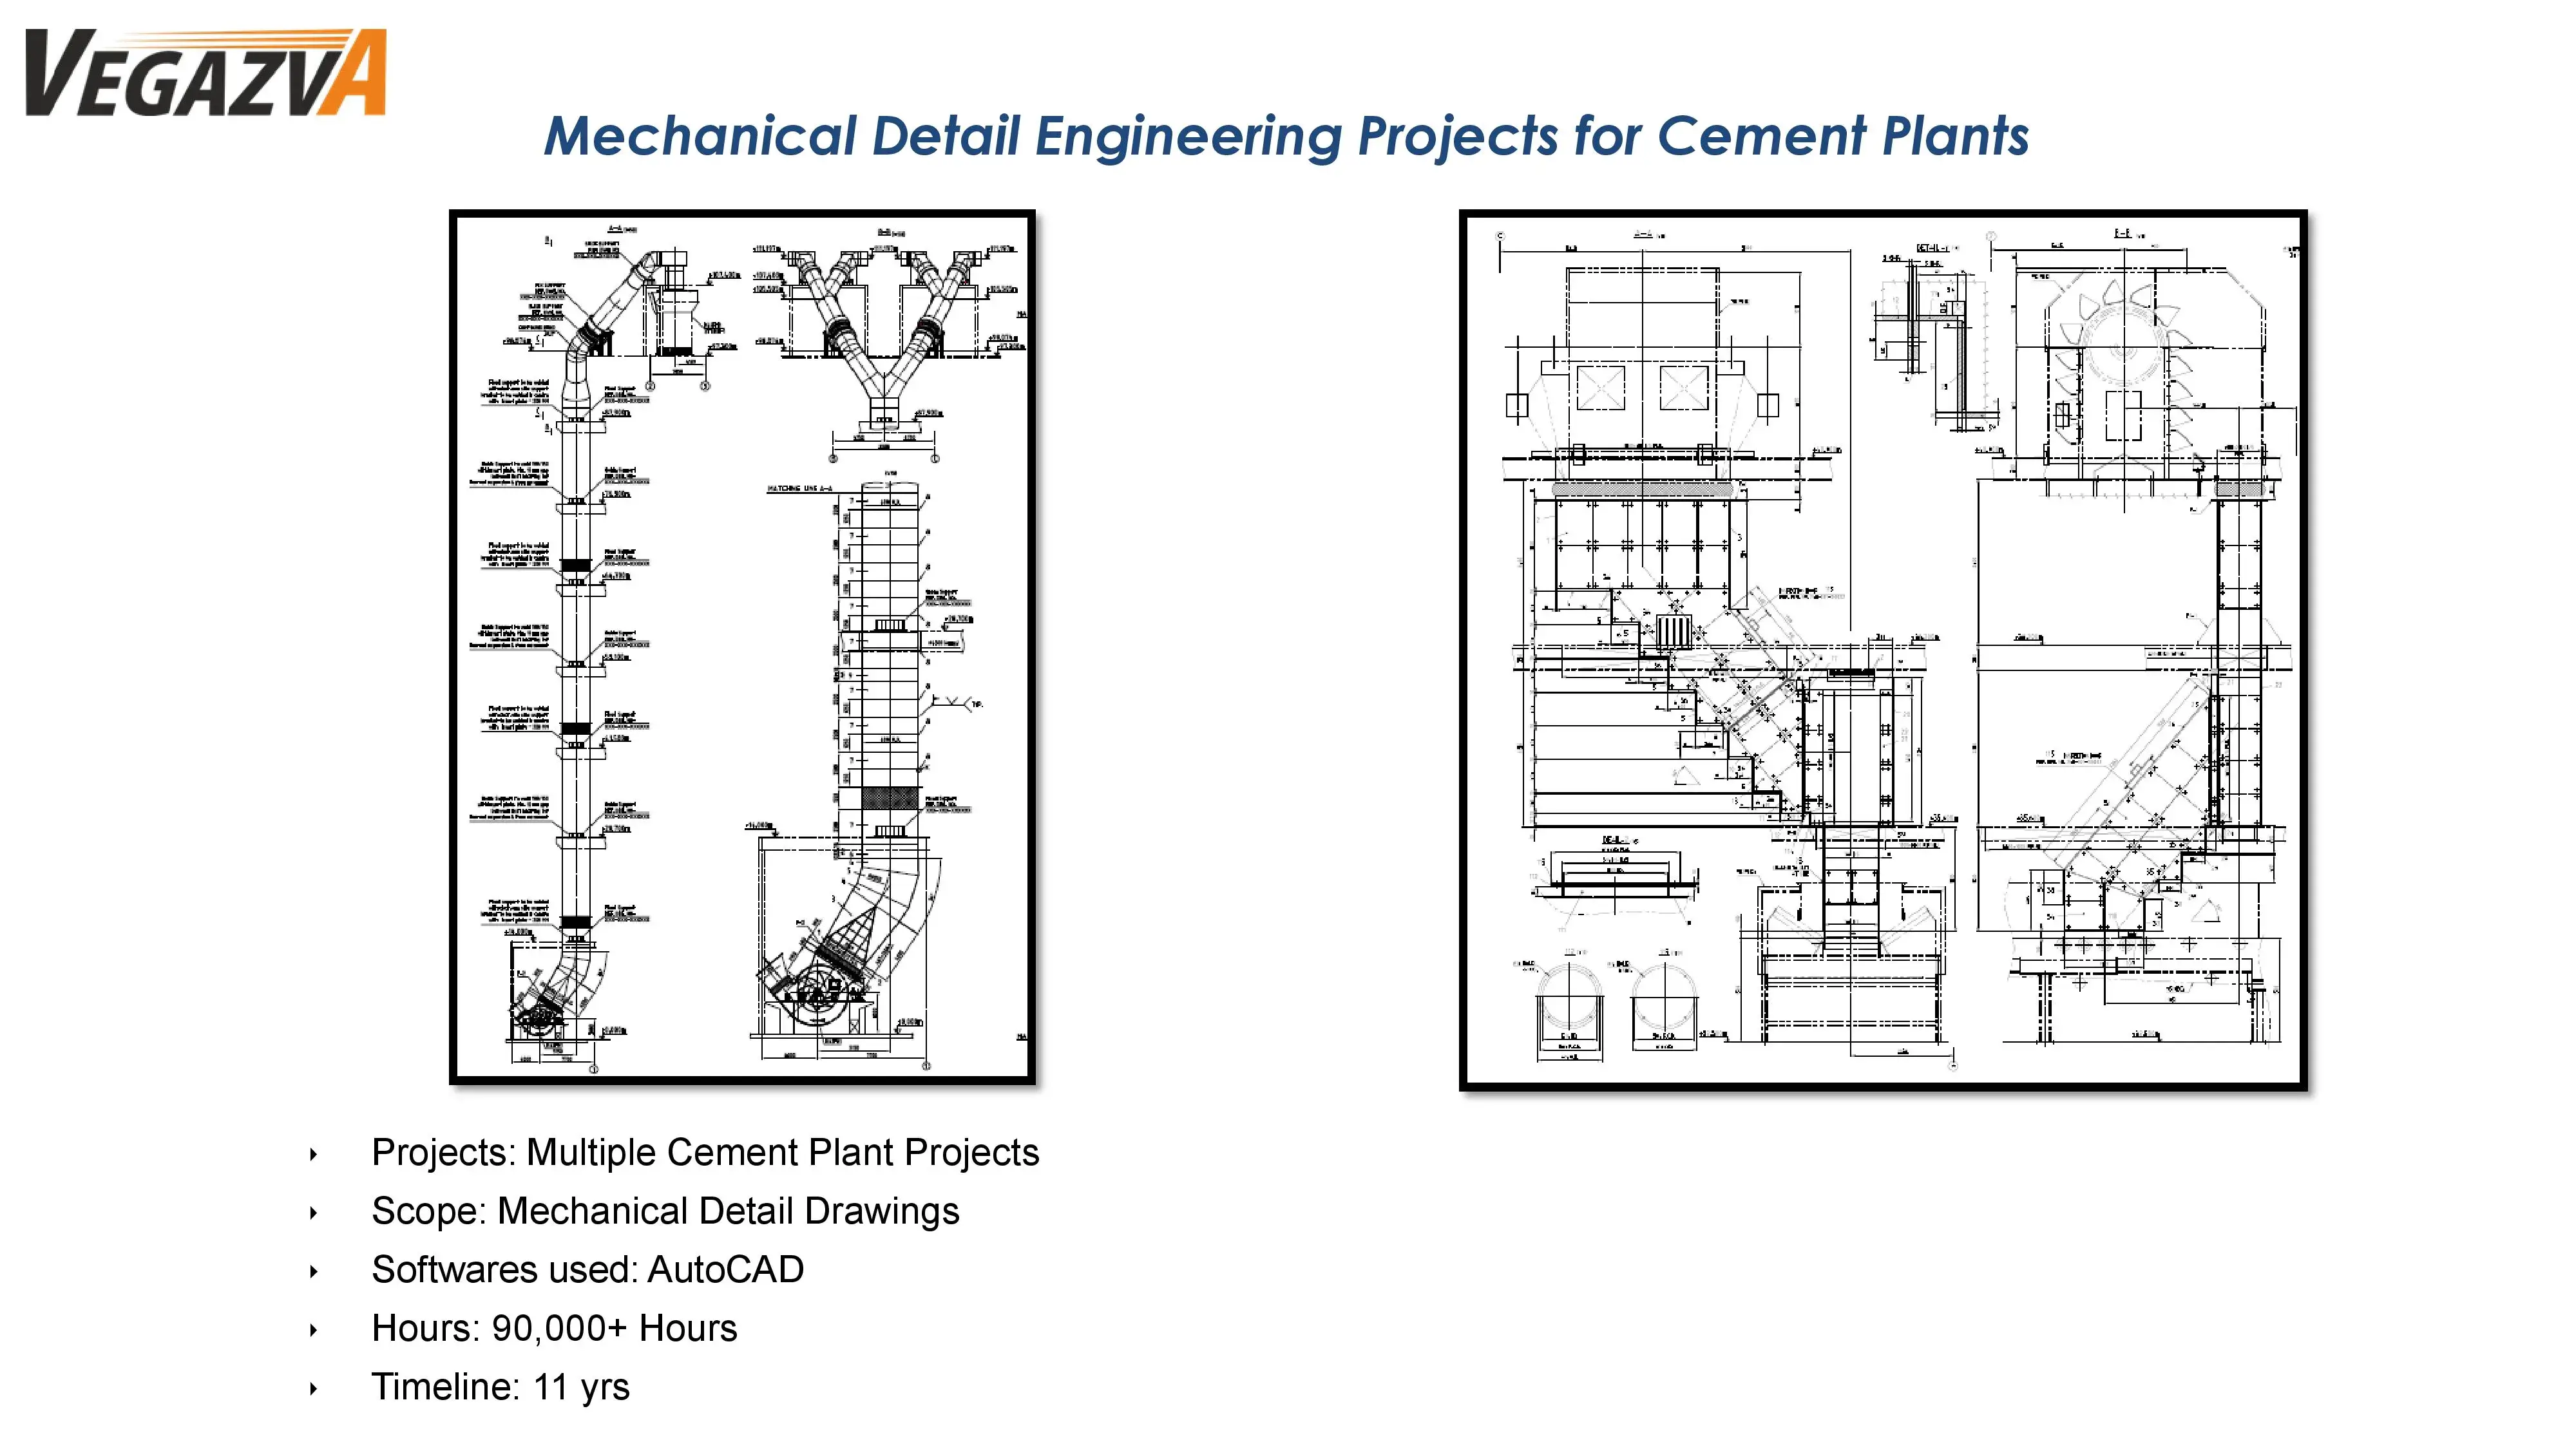 Mechanical Detail Engineering Projects for Cement Plants